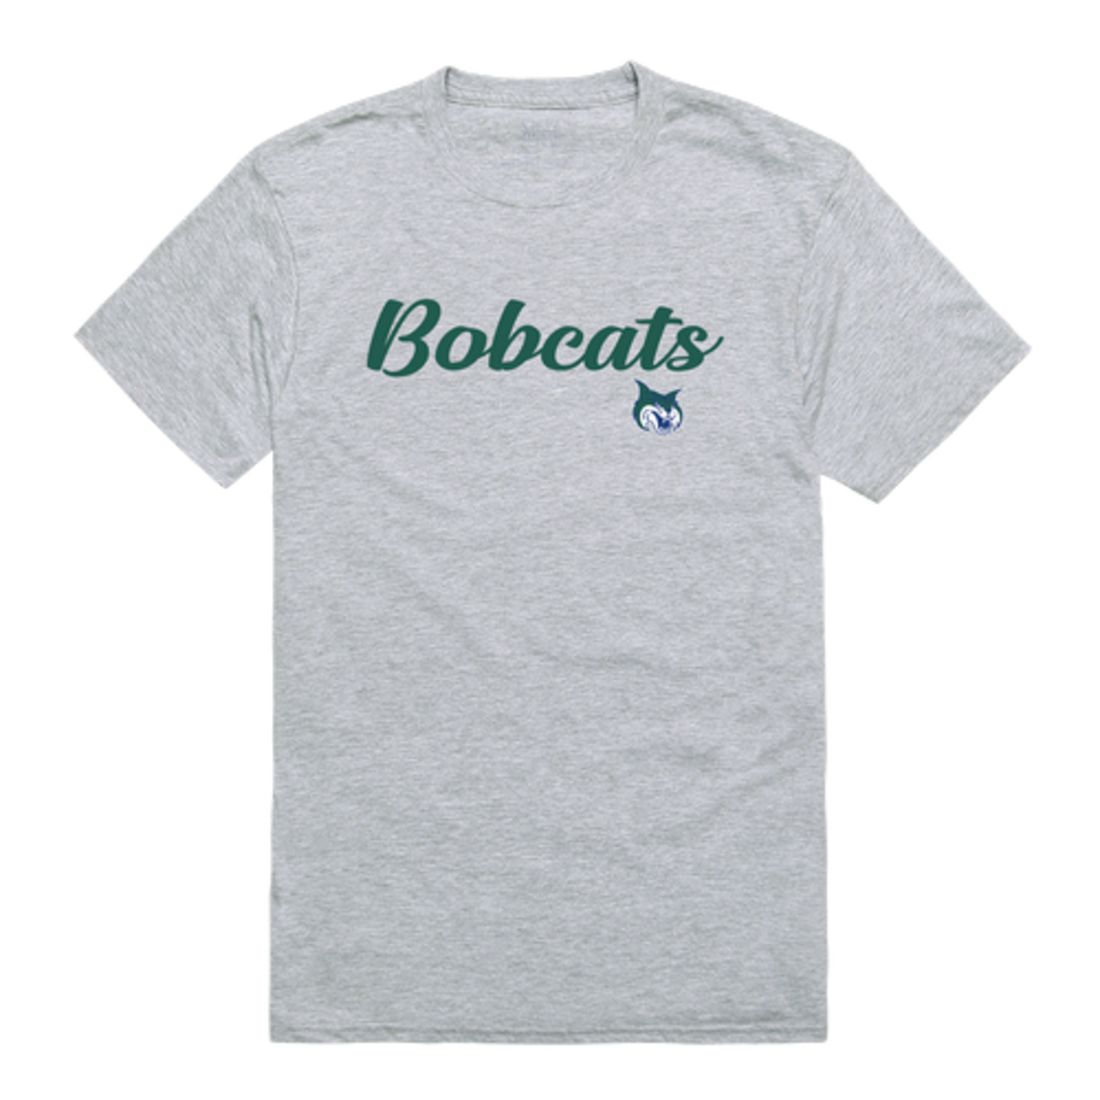 Georgia College and State University Bobcats Script T-Shirt Tee